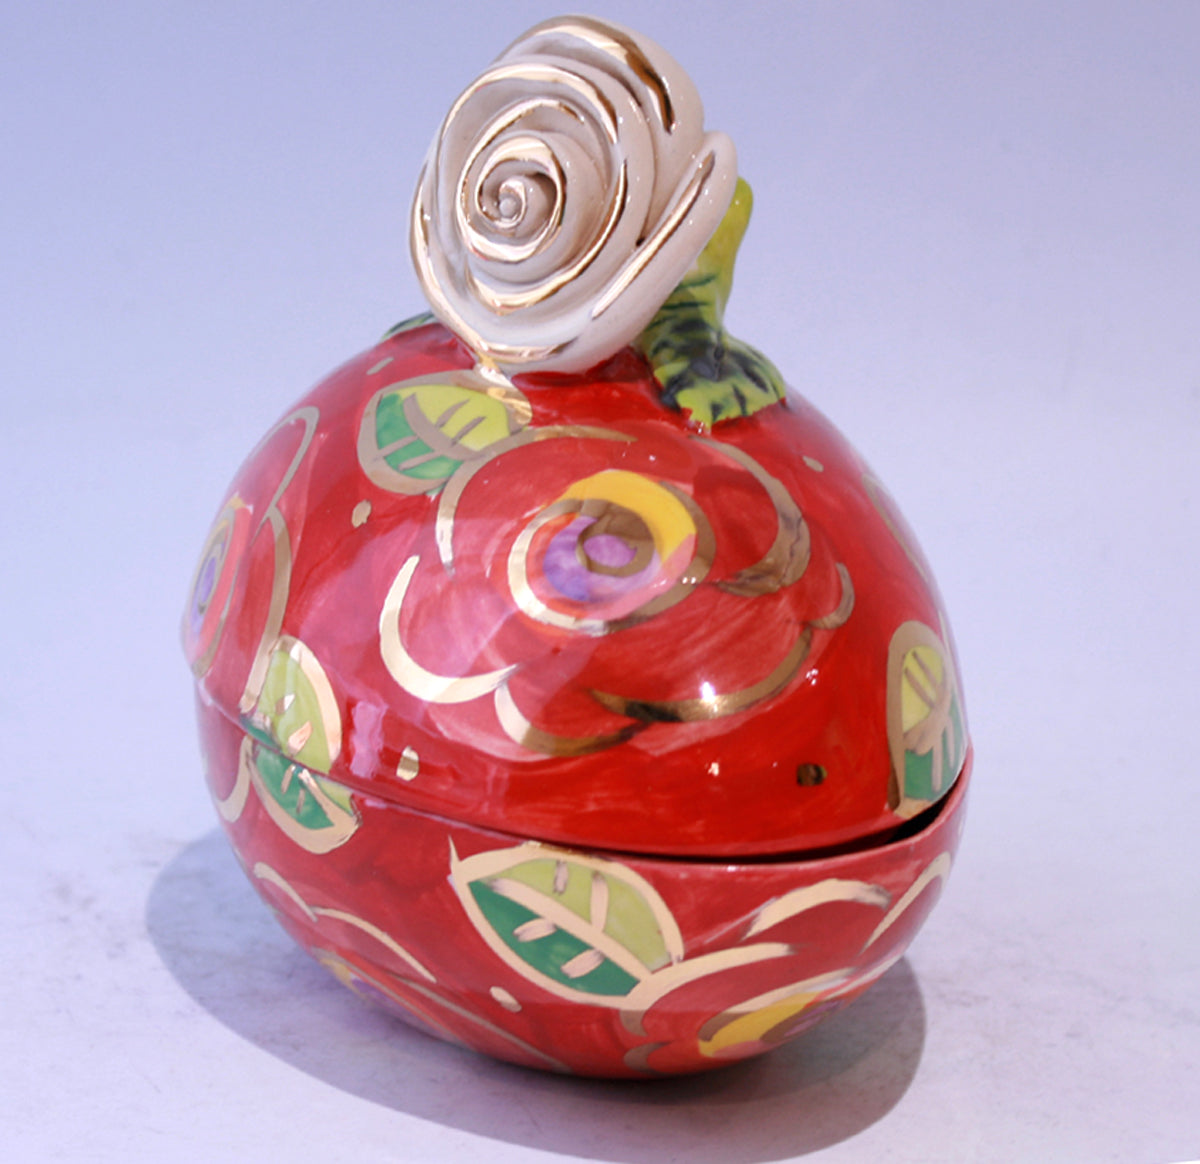 Easter Egg in Red New Rose - MaryRoseYoung